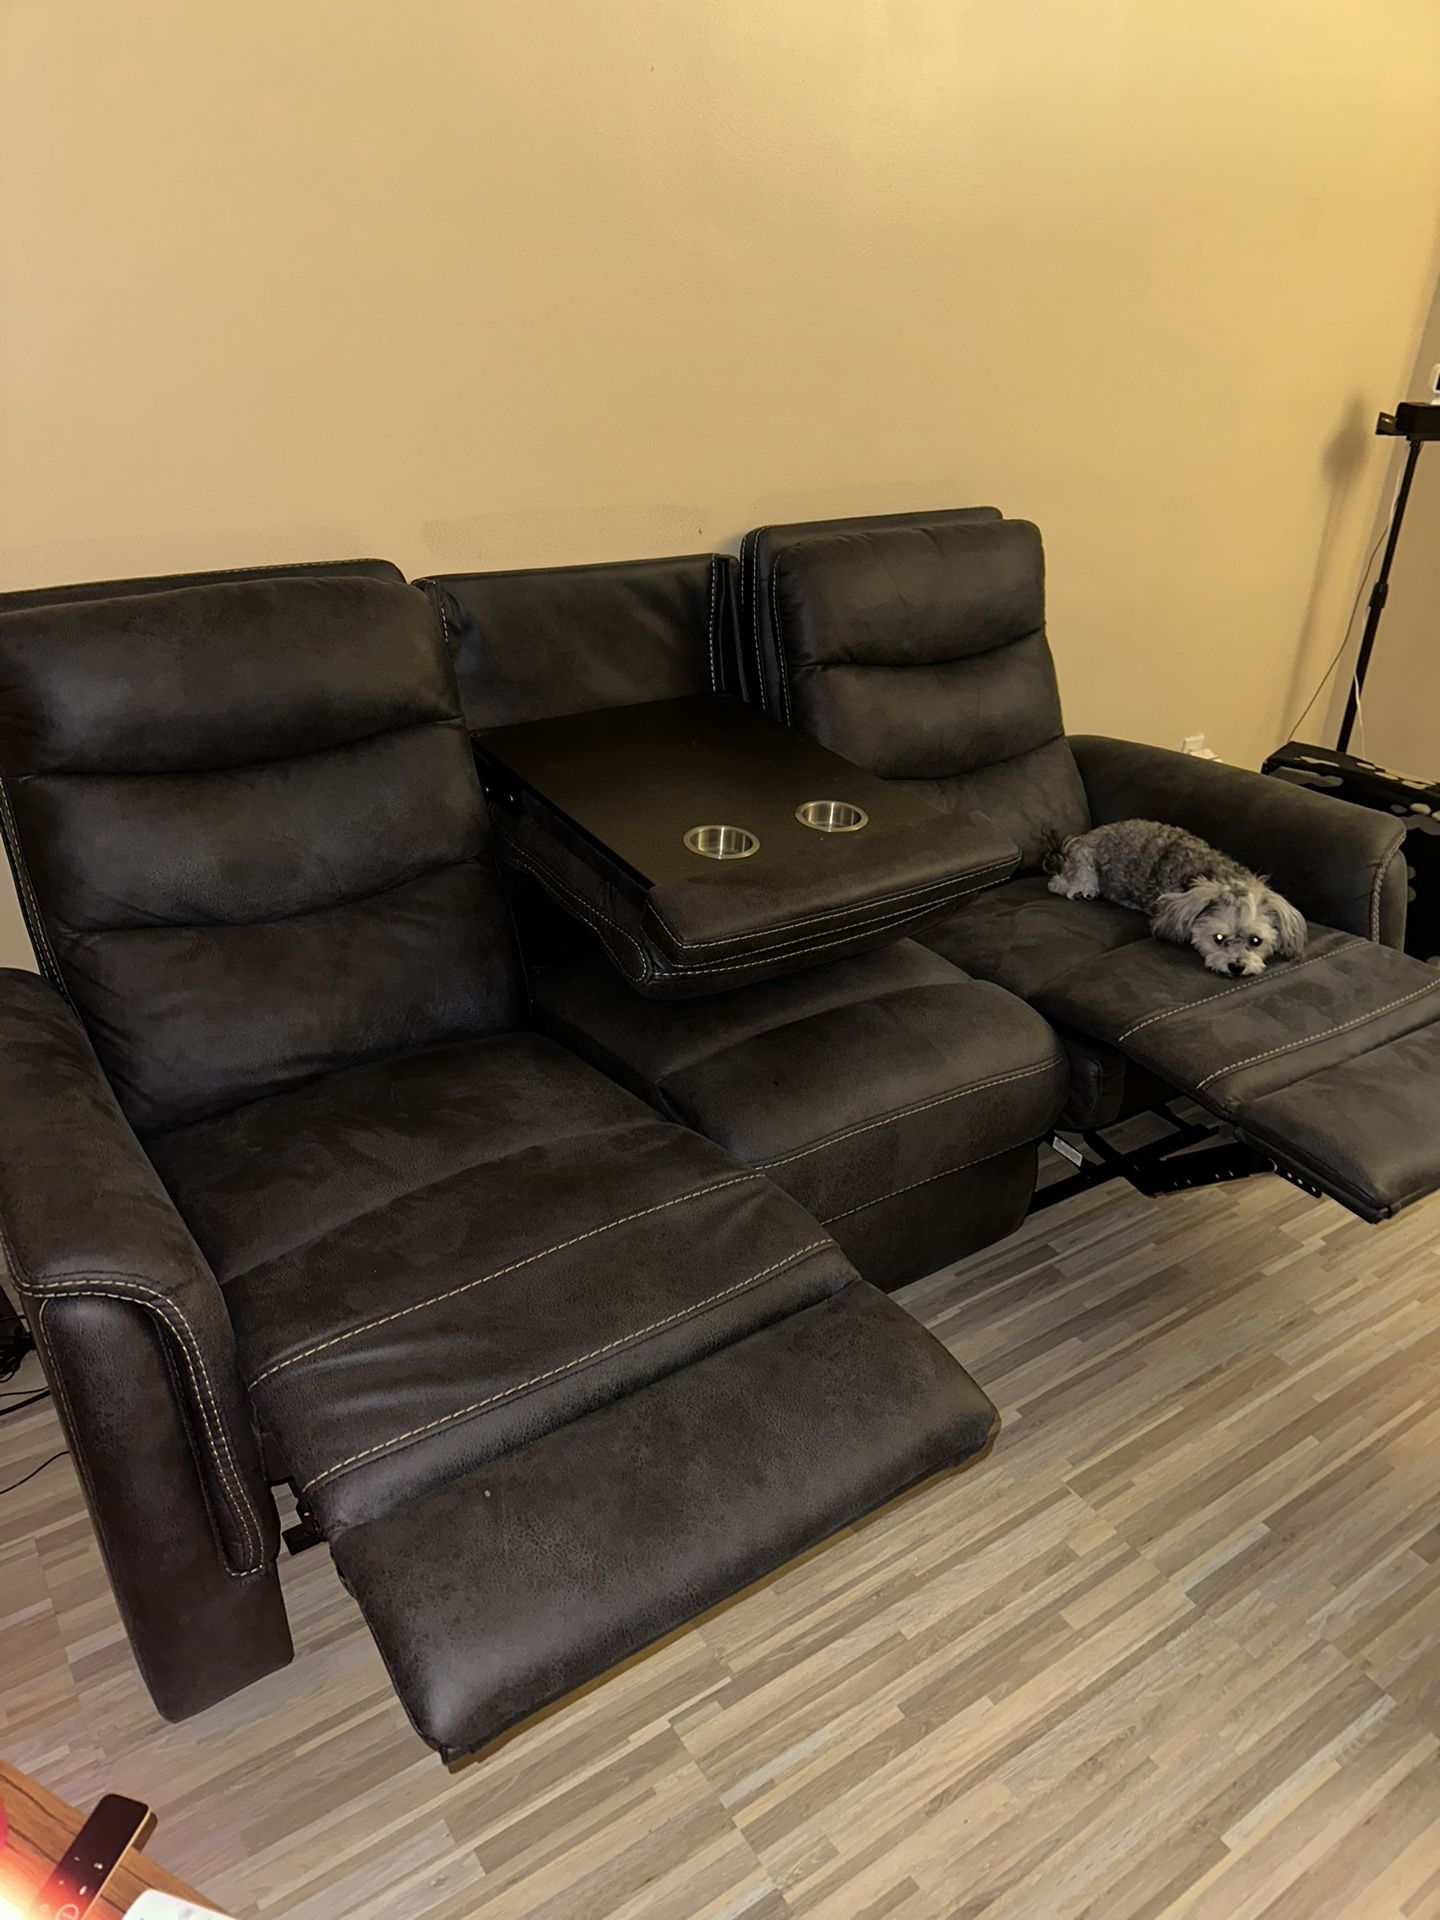 Bobs recliner Couch